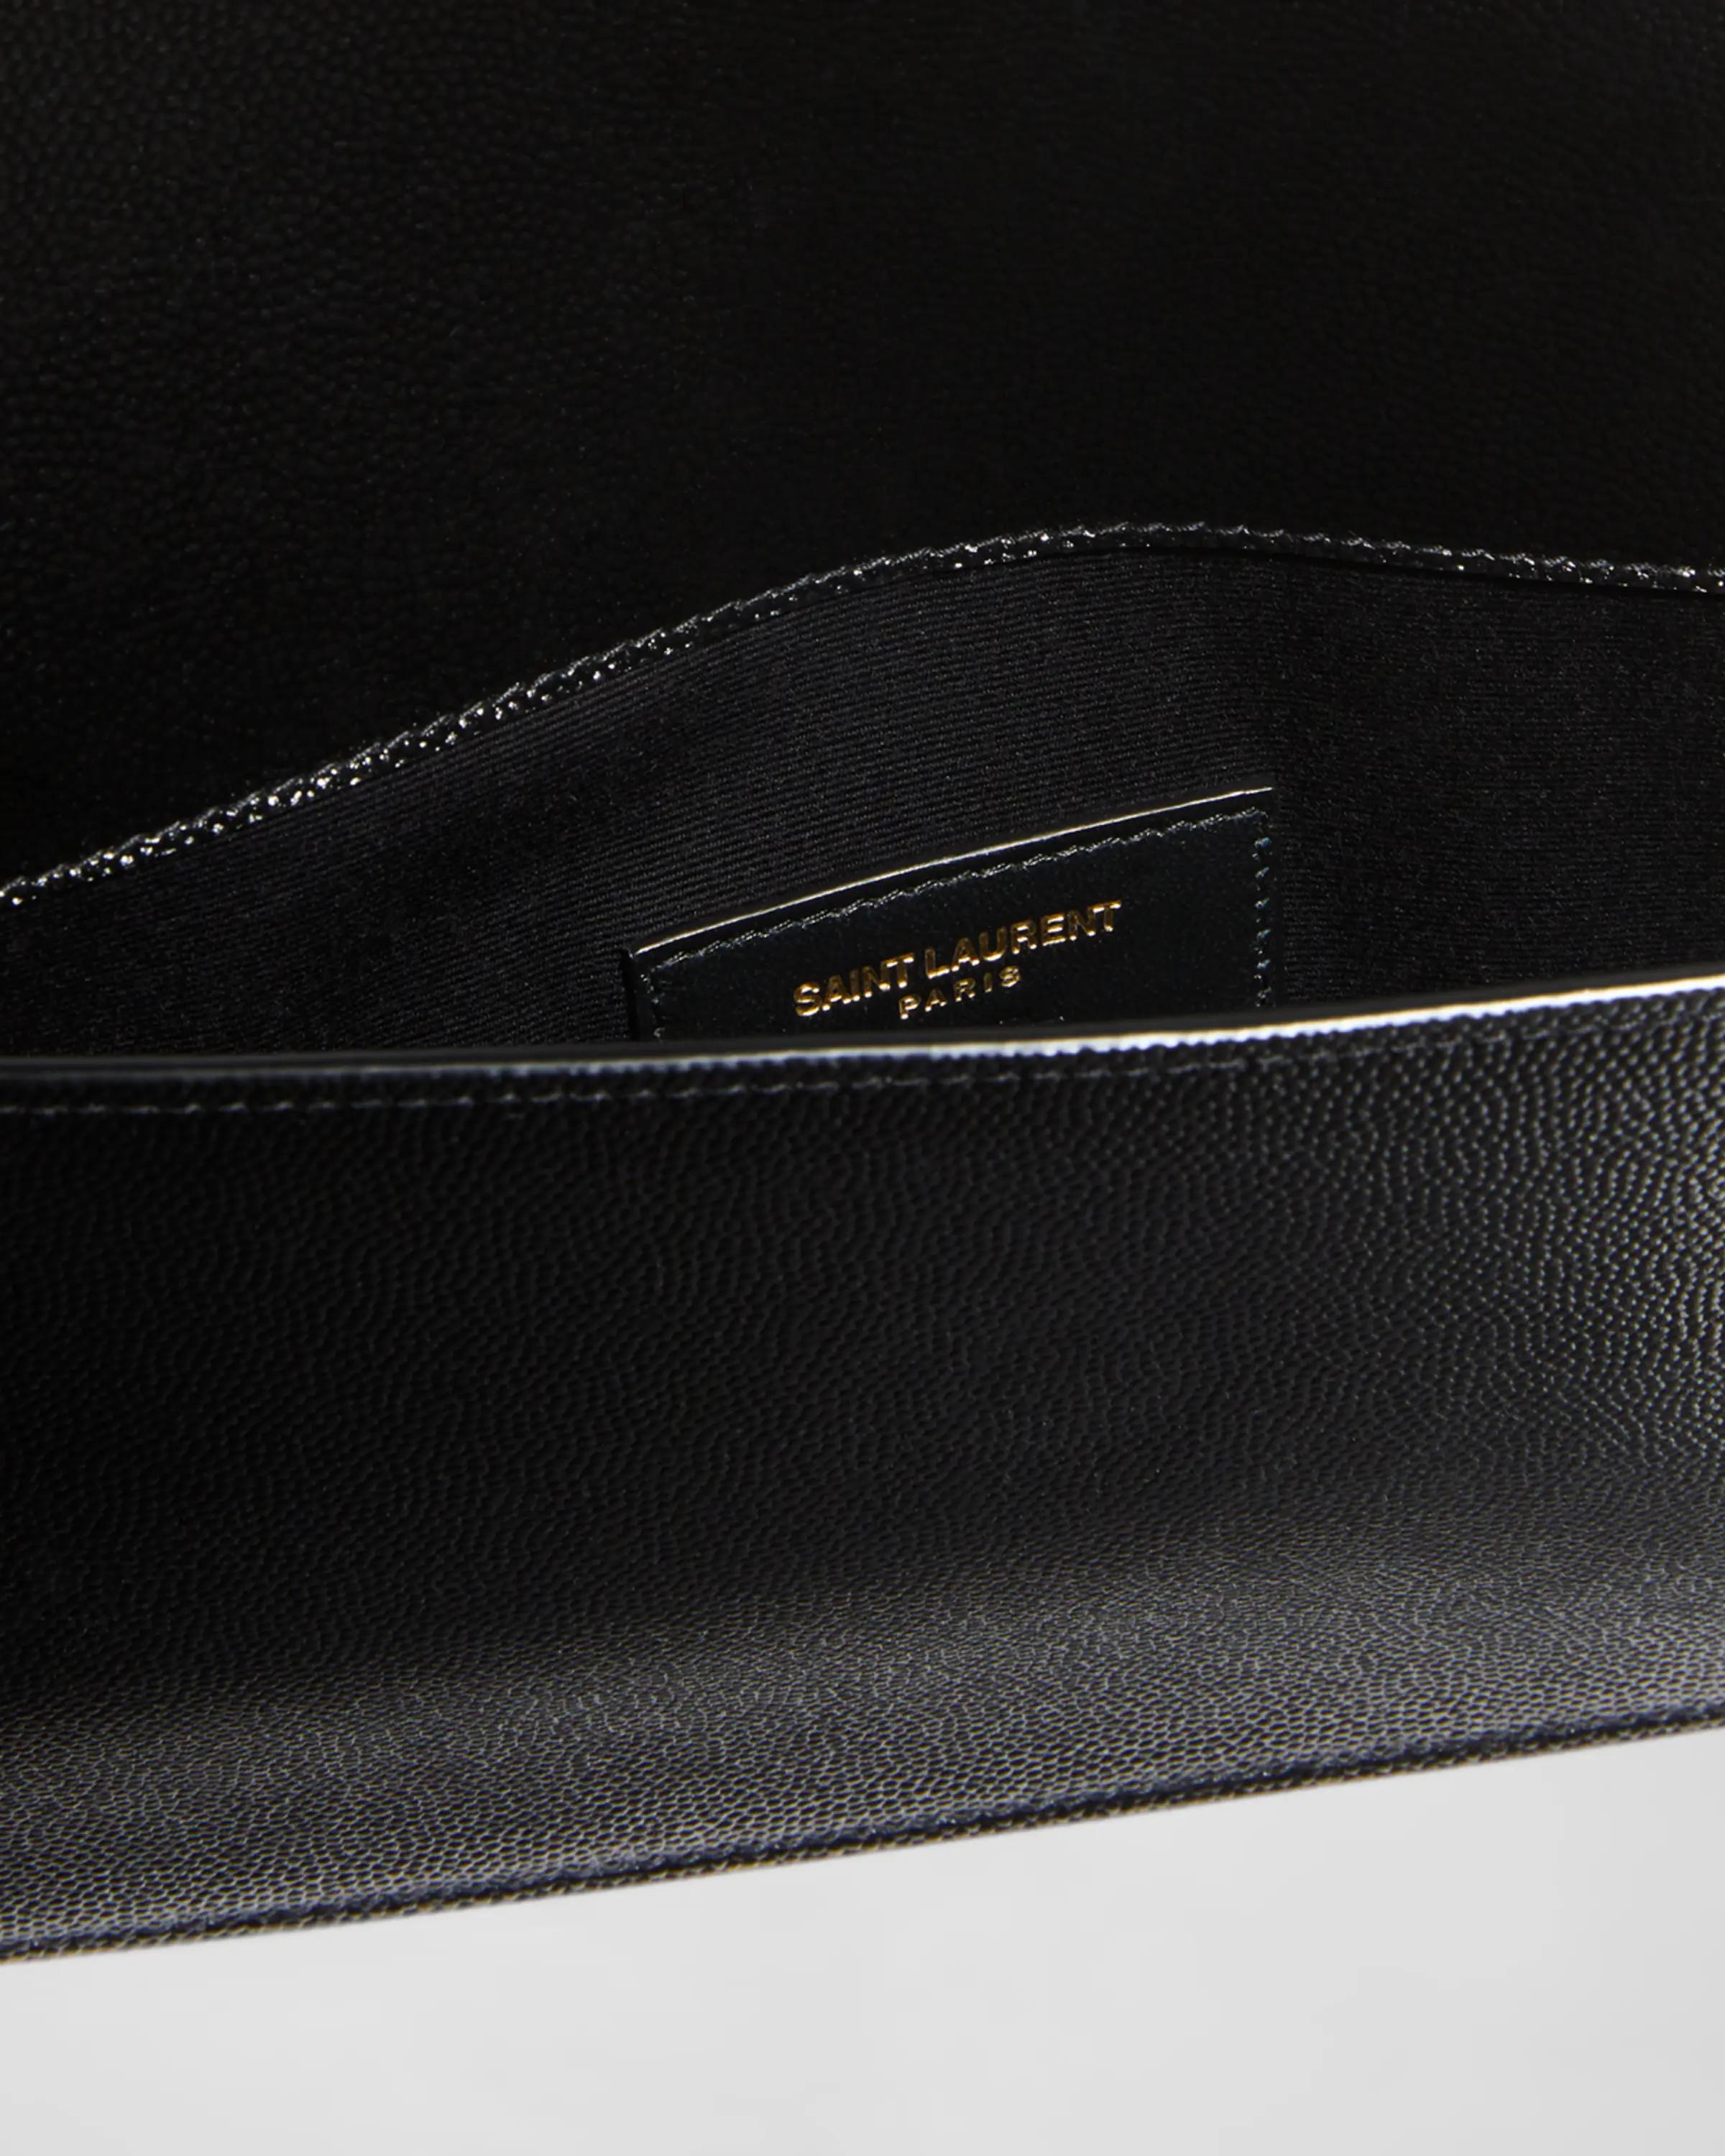 Saint Laurent YSL Black Uptown Leather Clutch Pochette In Excellent Condition For Sale In Studio City, CA